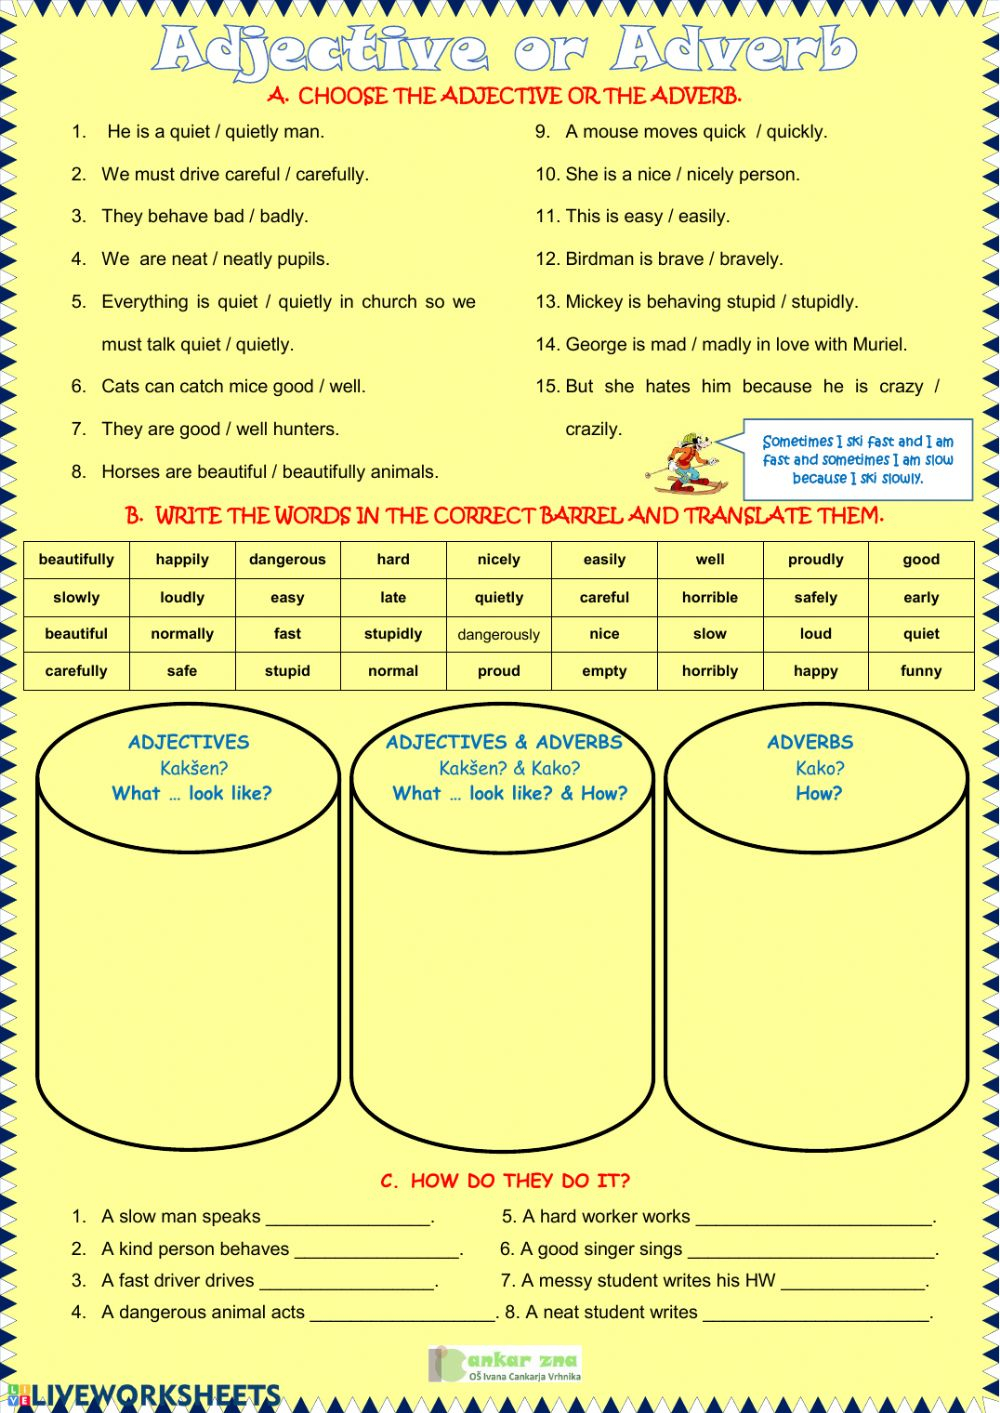 adjective-and-adverb-clauses-worksheet-with-answers-adverbworksheets